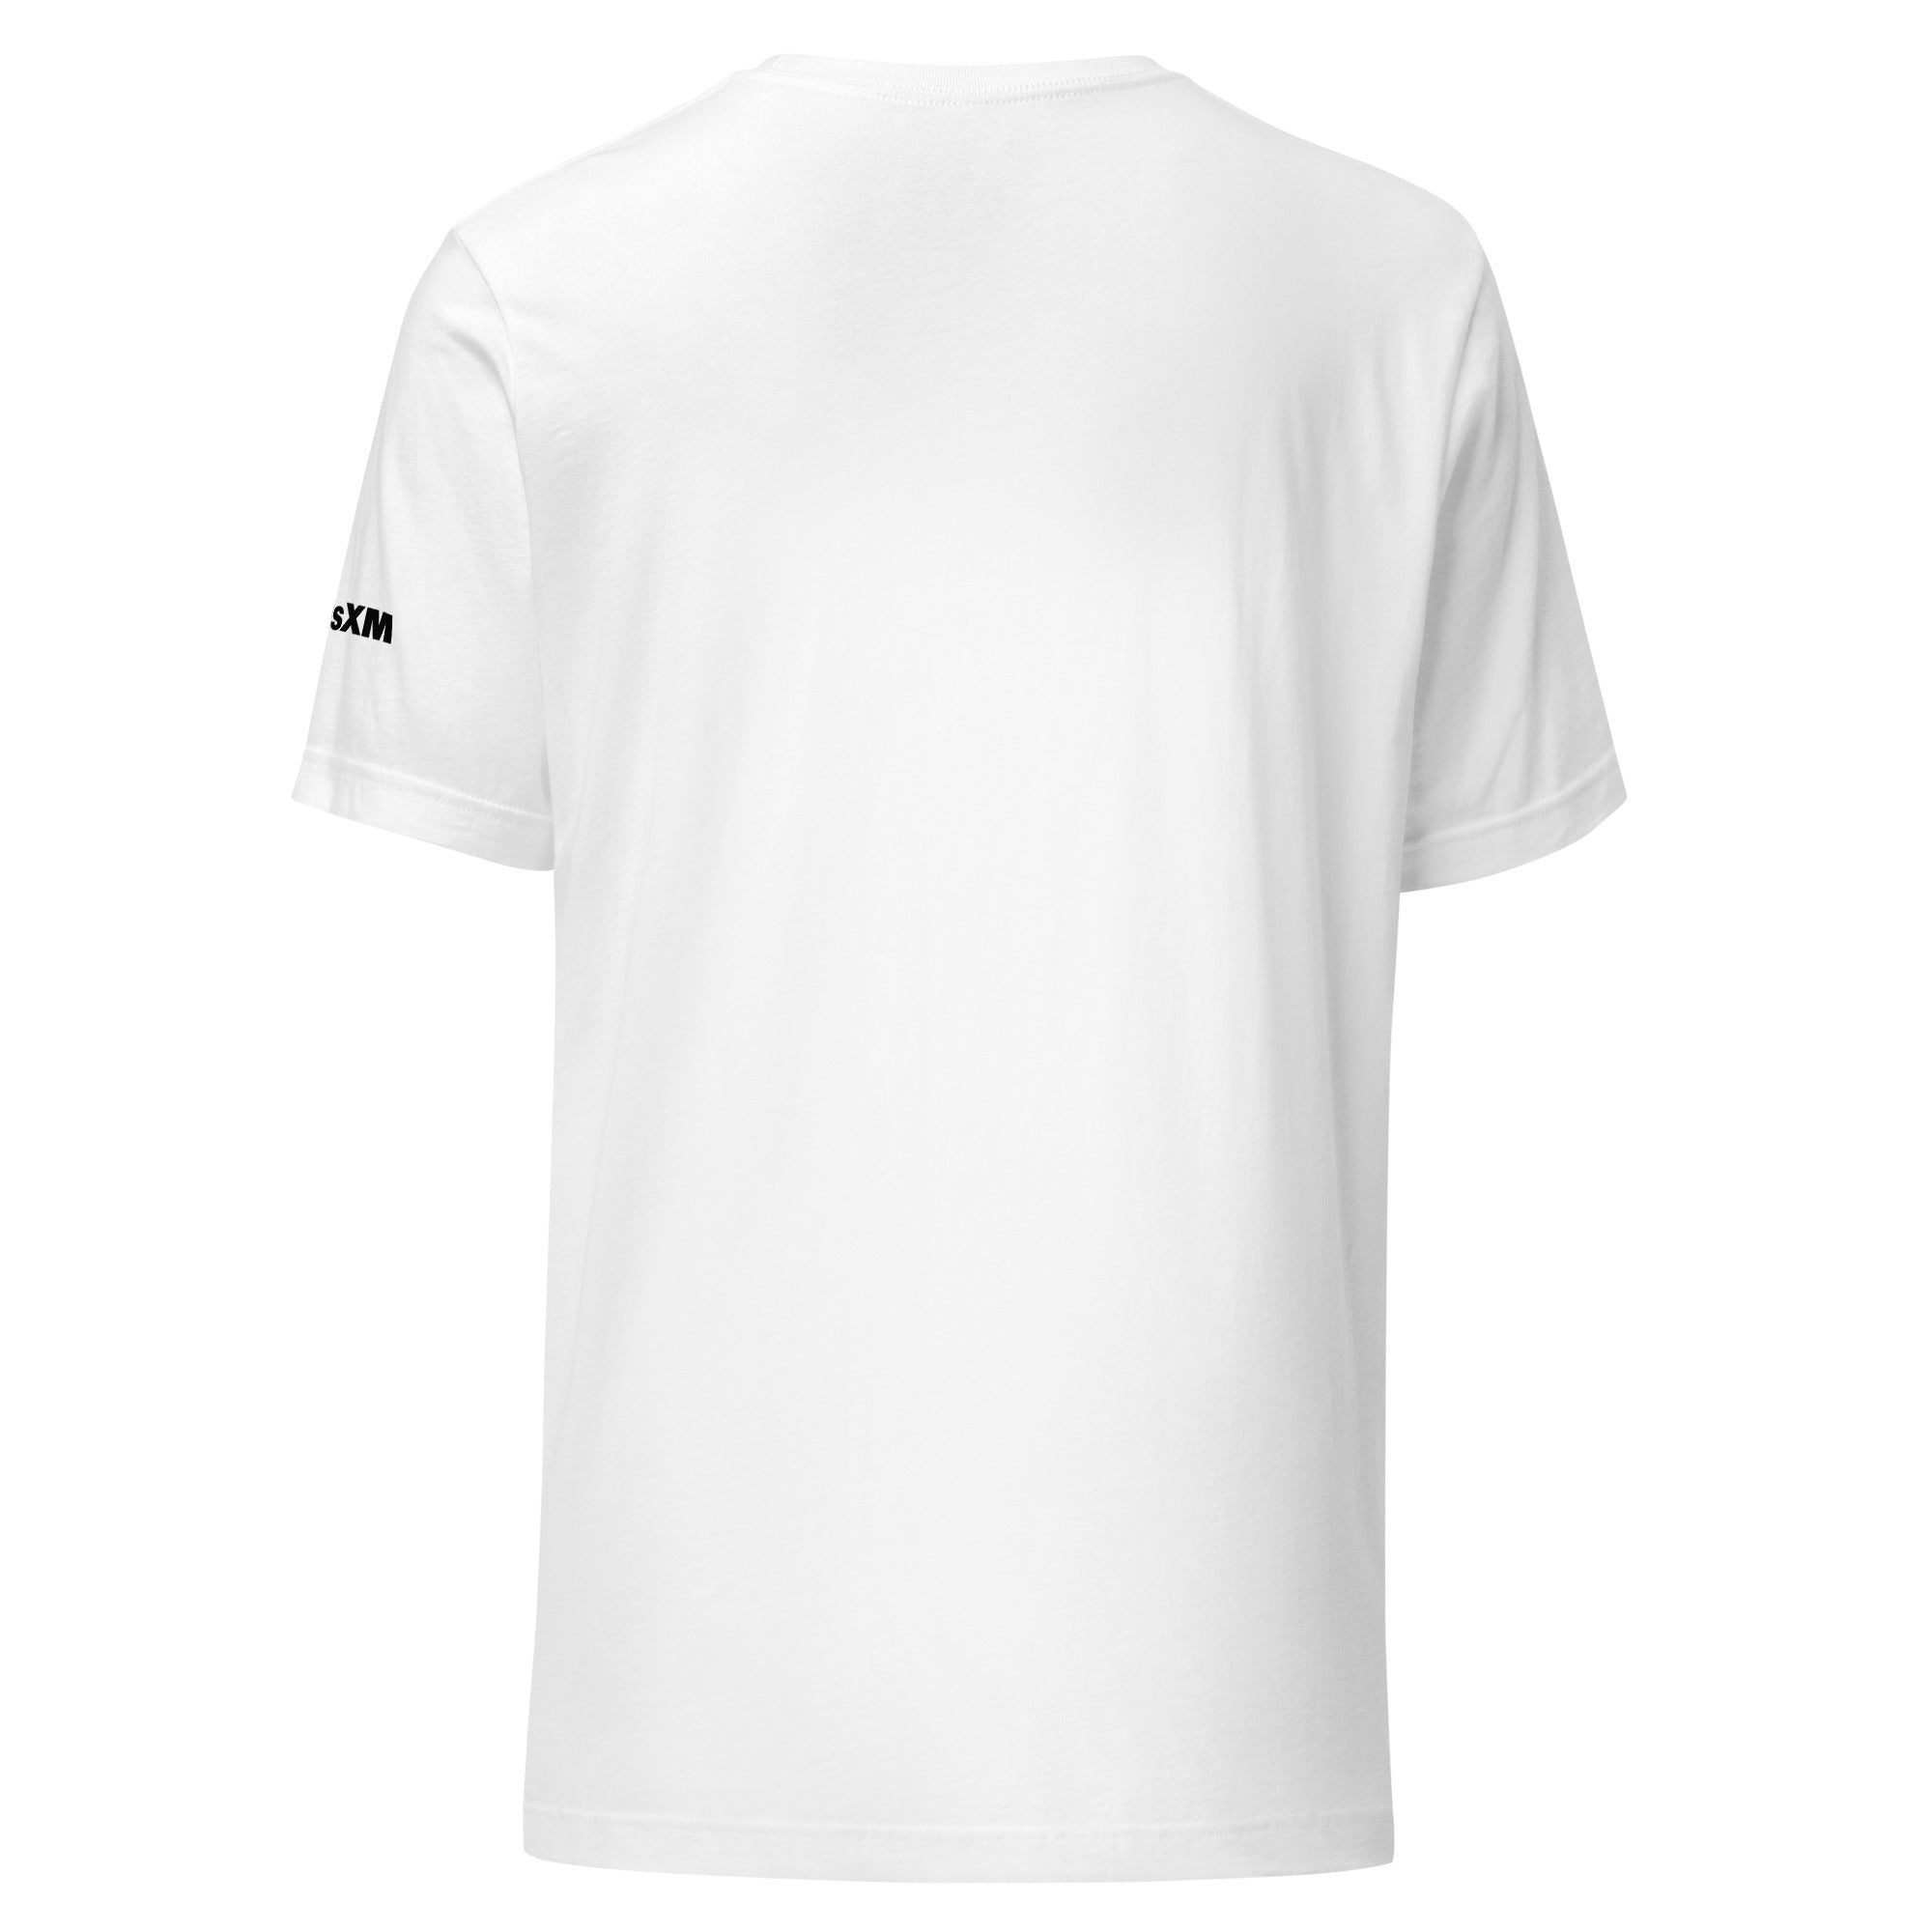 The Message: T-shirt (White)